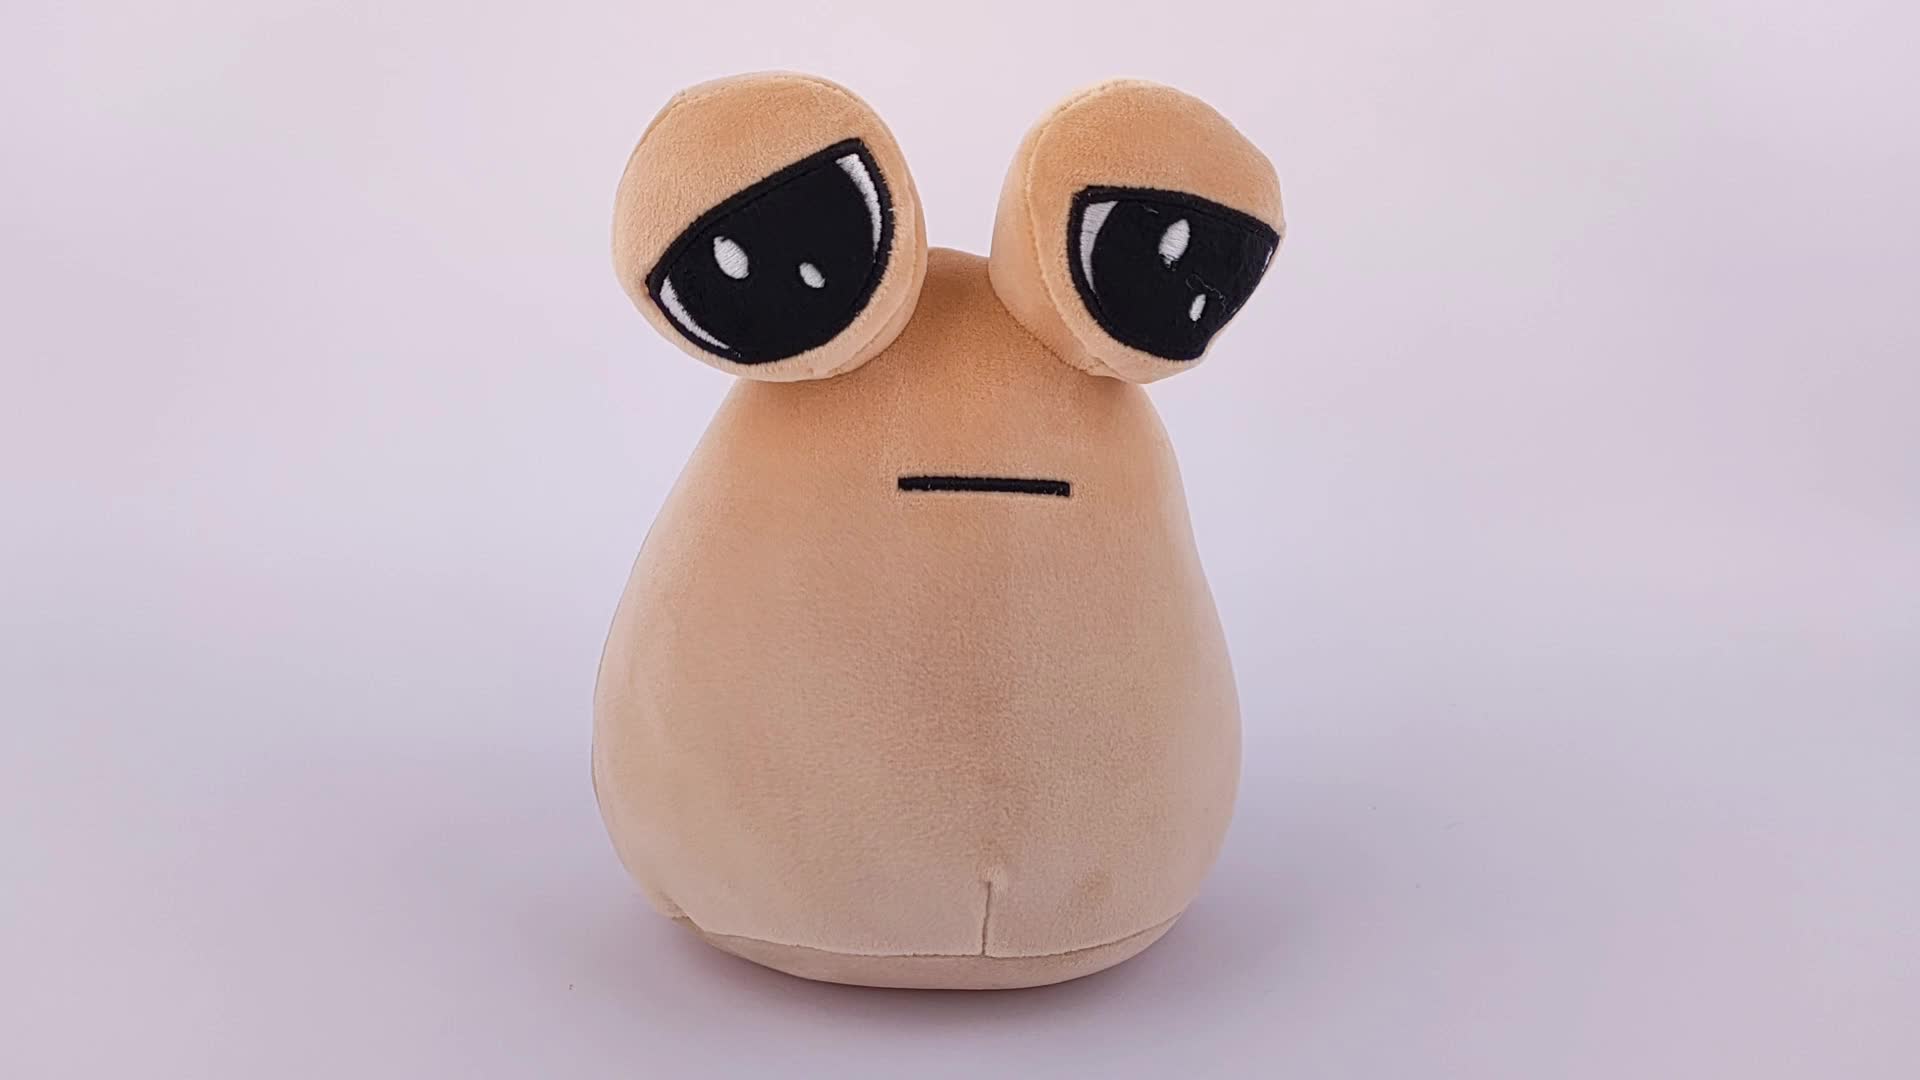 vansh on X: time to buy a pou plushy for emotional support https